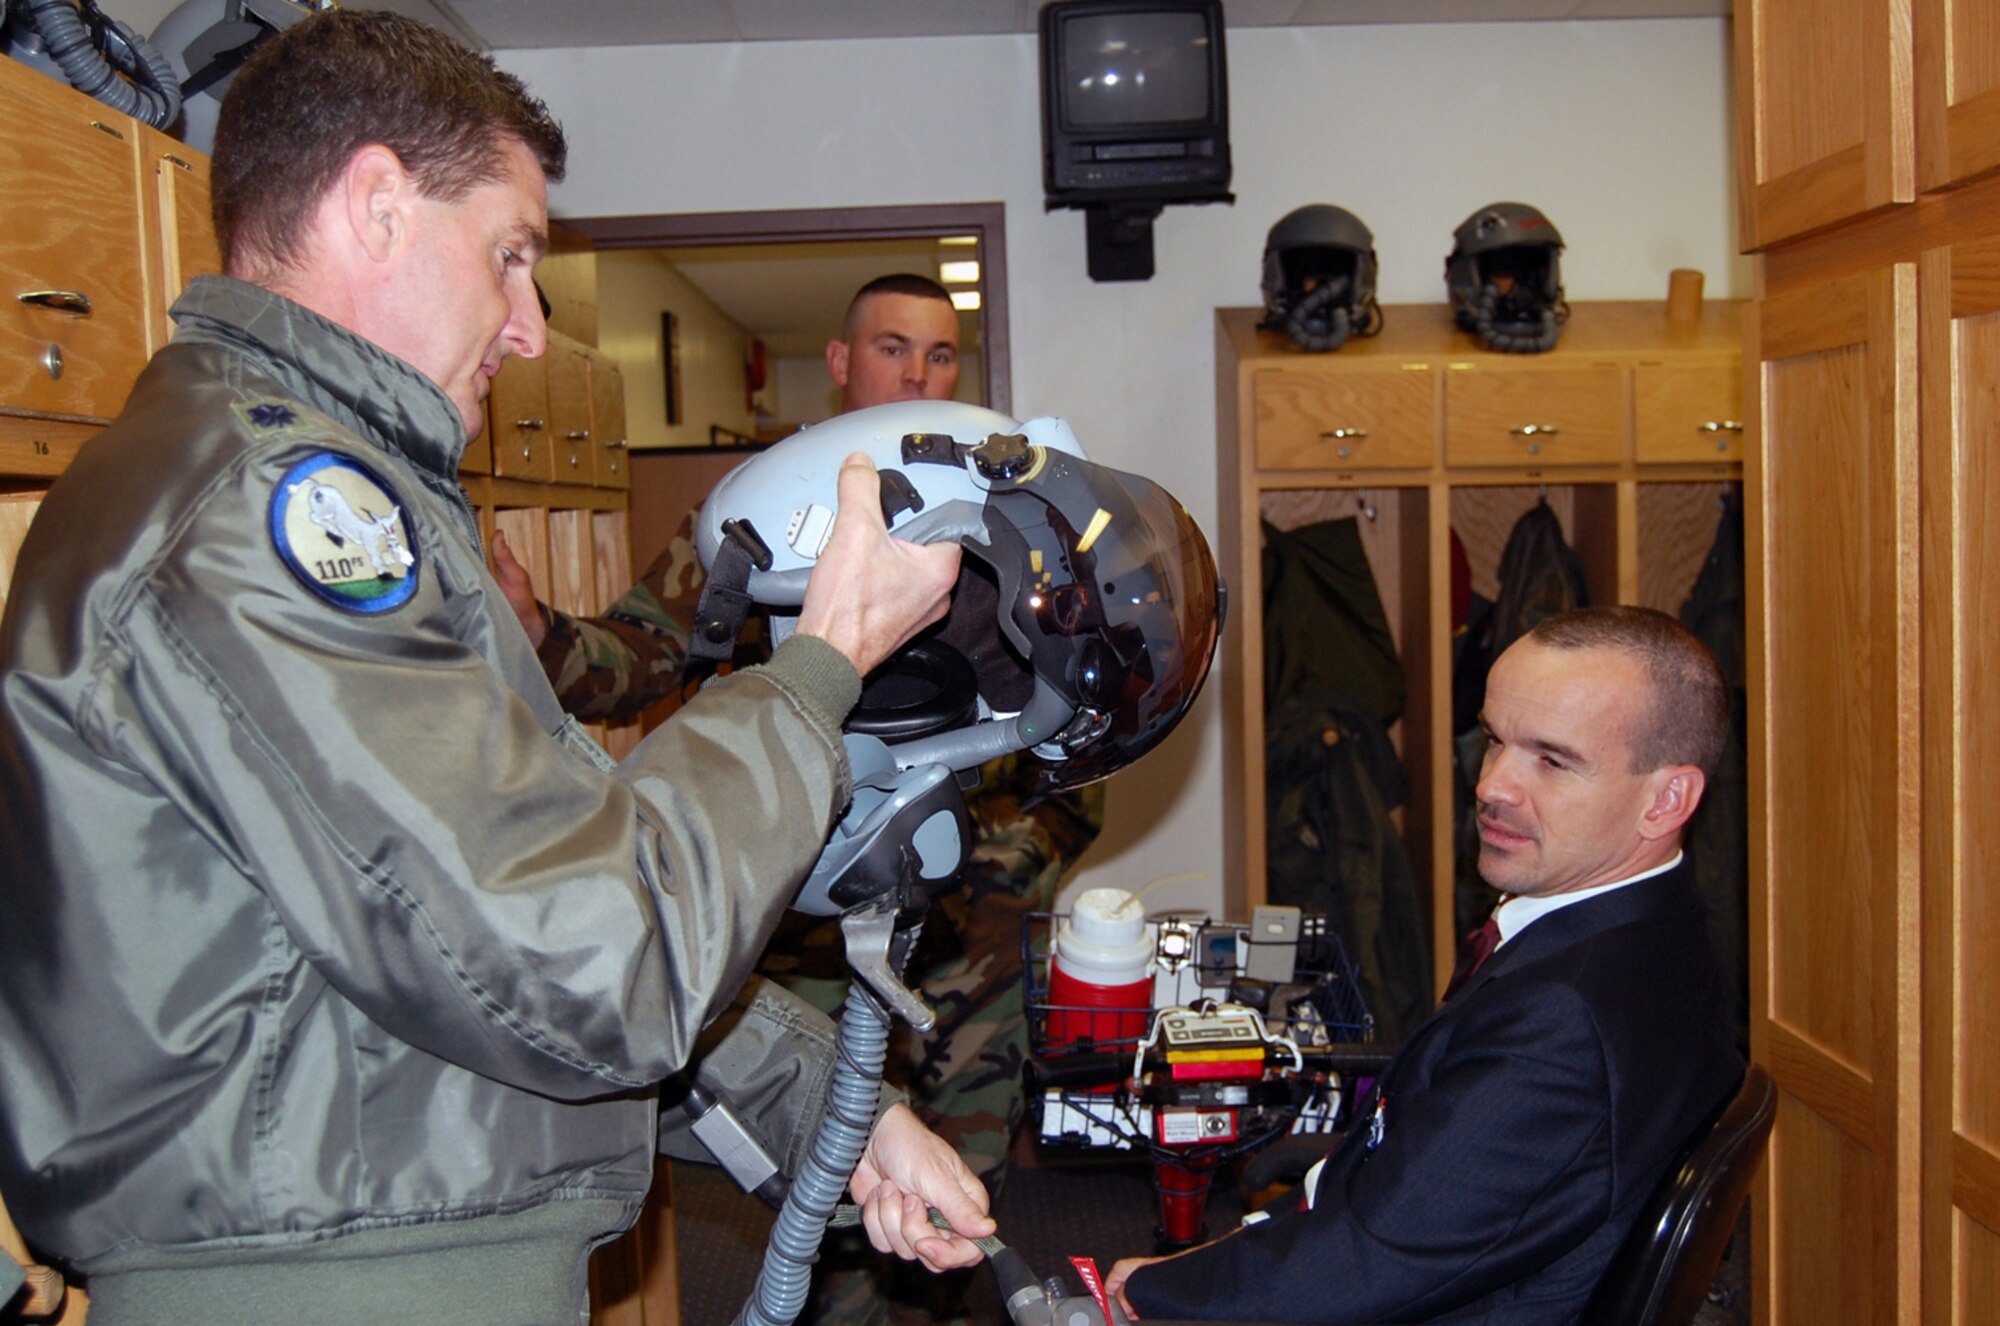 Lt. Col. Mike Flanagan, 131st Operations Group, explains the helmet that the pilots wear in flight to Willie "Wild Man" Deuster.  Deuster was the speaker for the Brown Bag Speaker Series May 3.